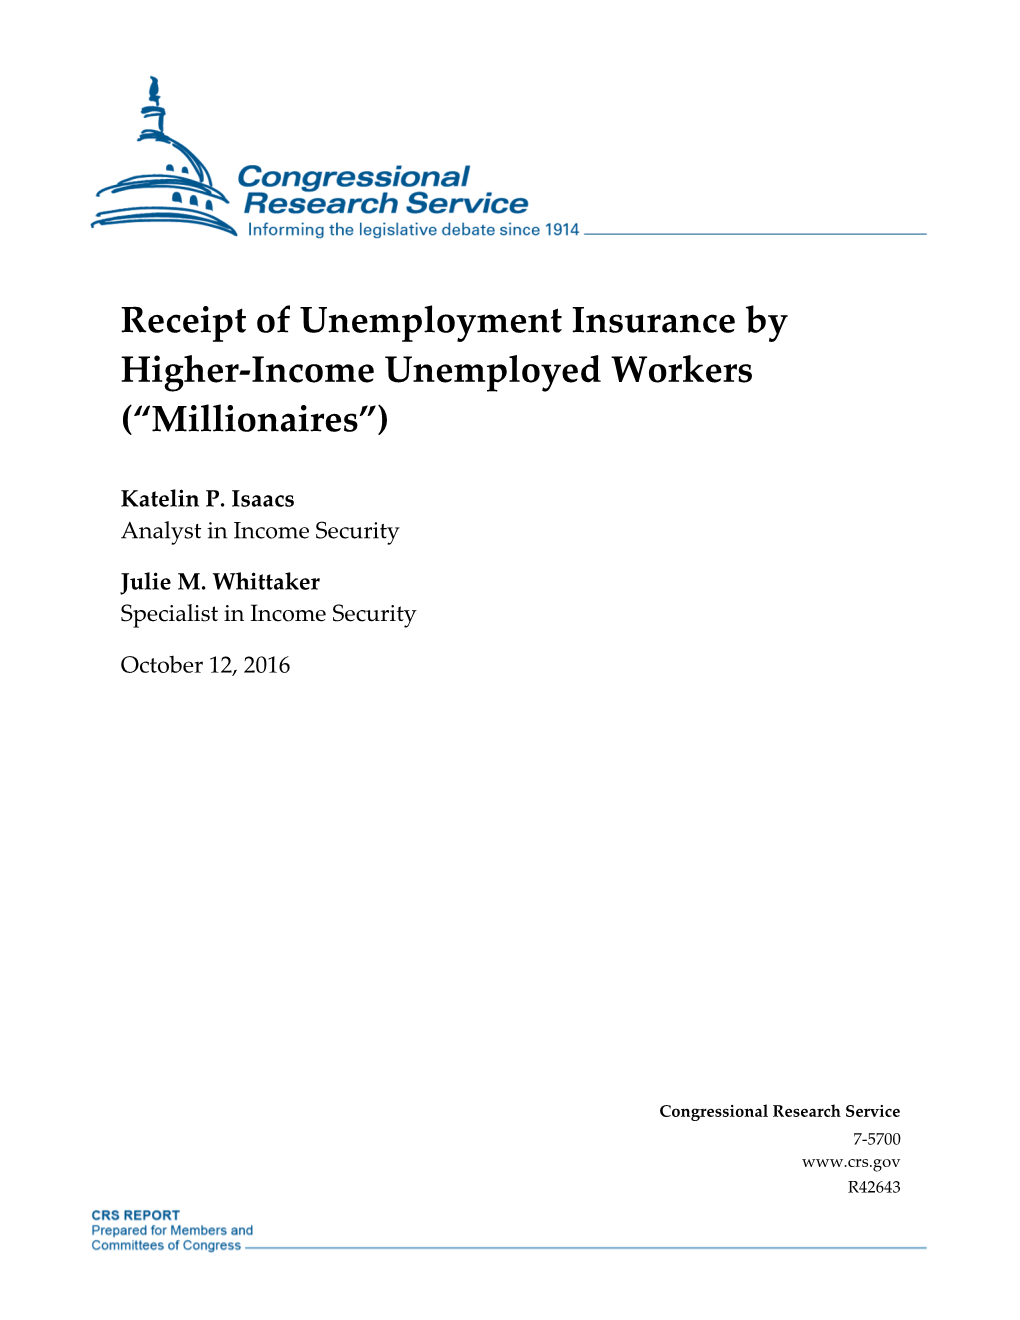 Receipt of Unemployment Insurance by Higher-Income Unemployed Workers (“Millionaires”)